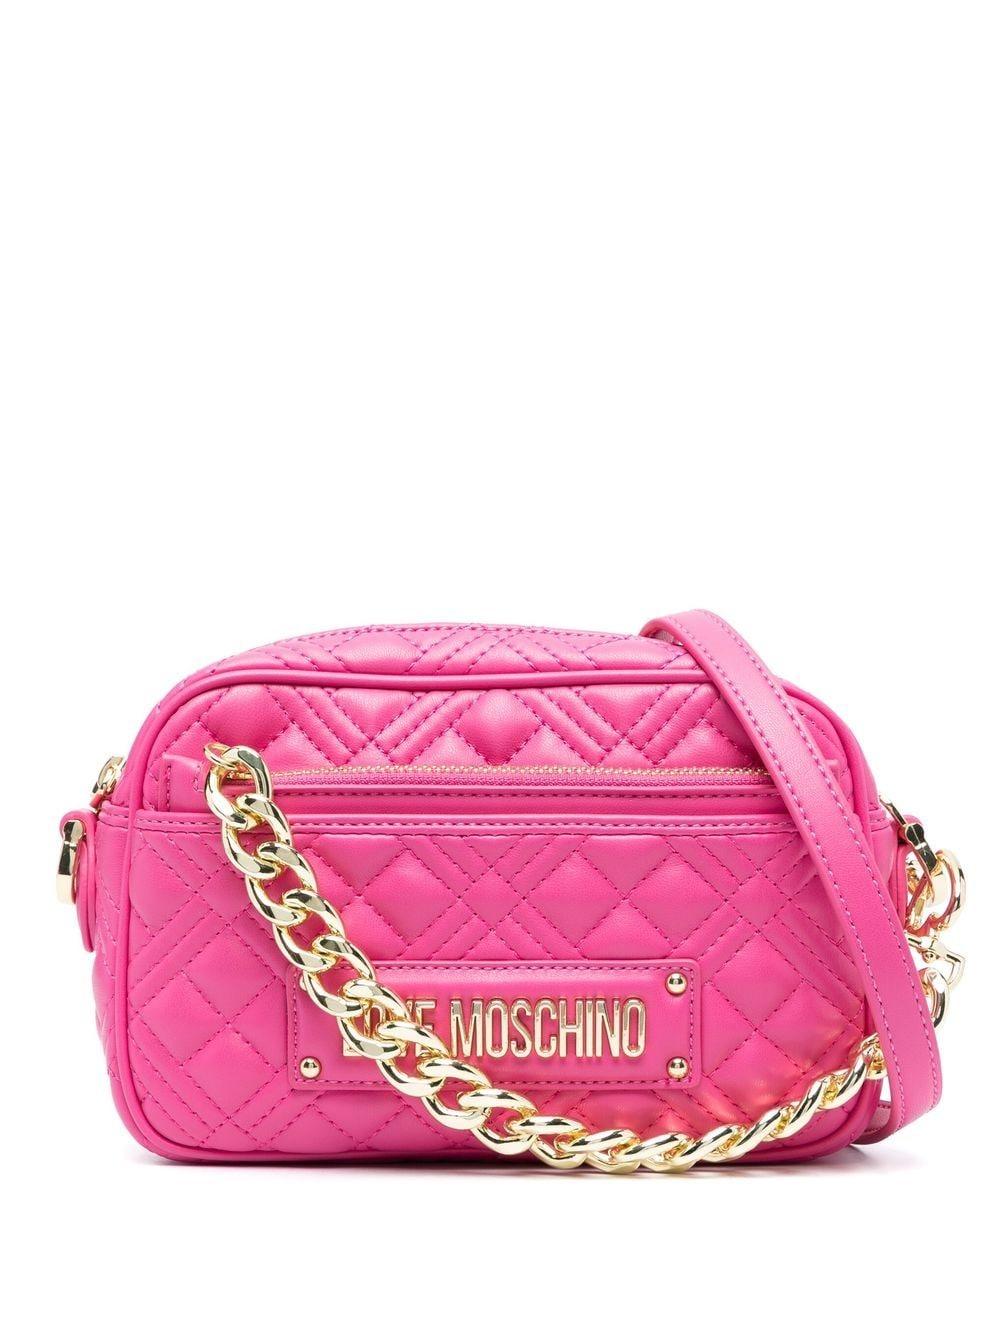 Love Moschino Quilted Crossbody Bag in Pink | Lyst